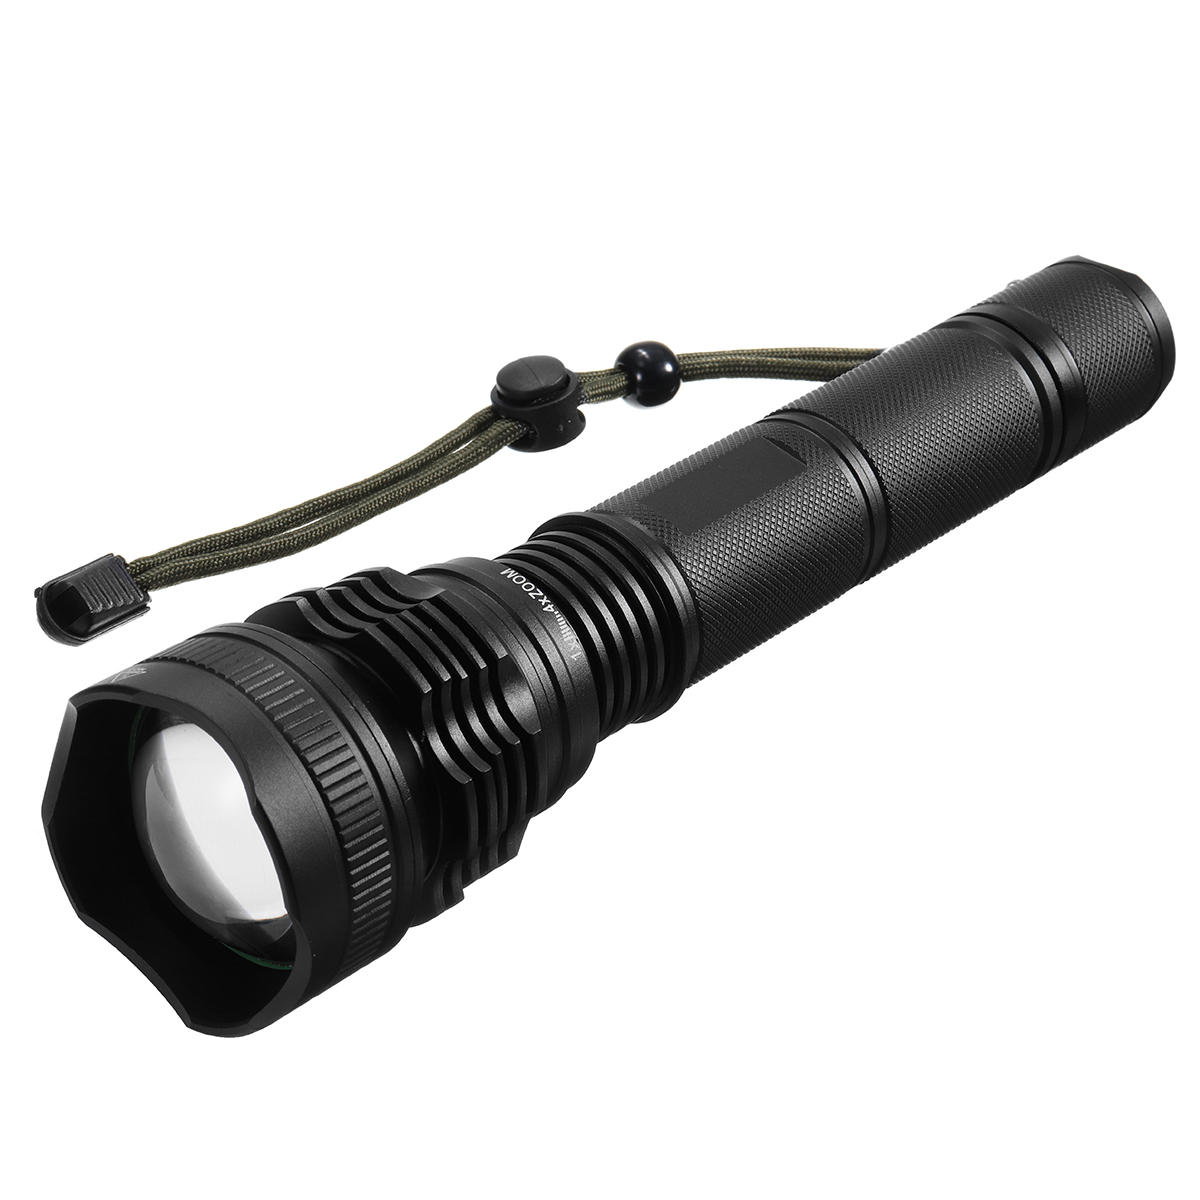 Tactical LED Flashlight Rechargeable 5 Modes Zoomable Waterproof Camping Hunting LED Torch Light